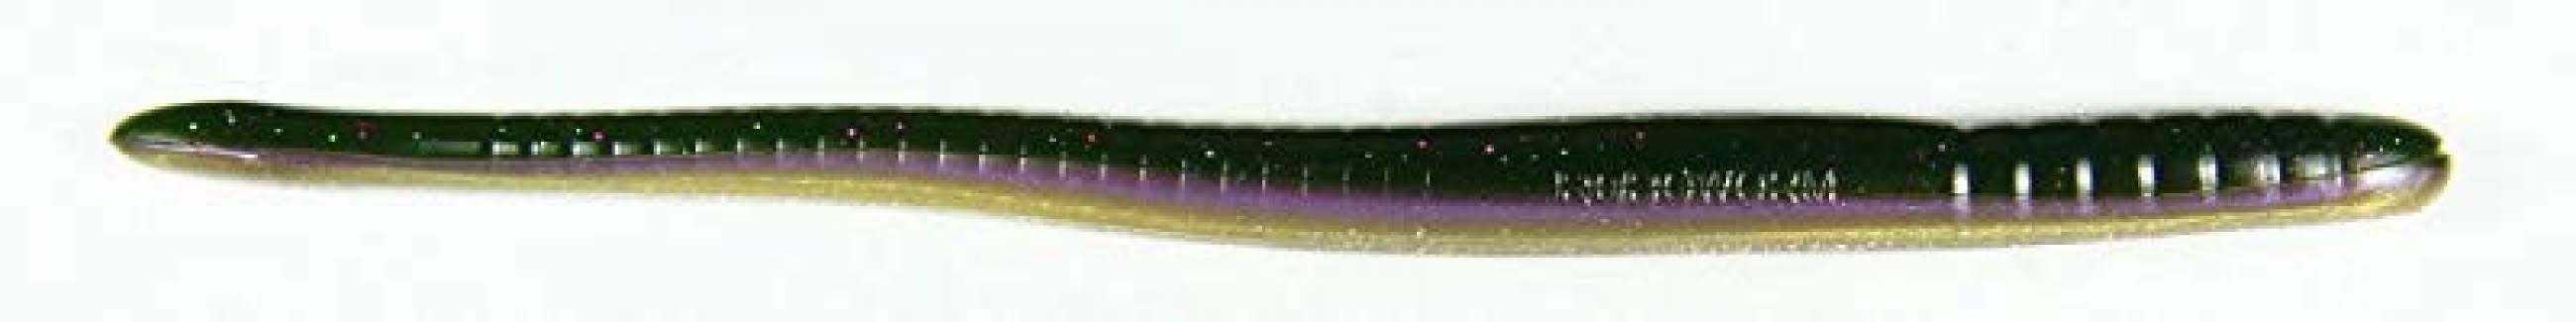 Roboworm Fat Straight Tail Worm Bait | Boating & Fishing | Best Price Guarantee | Delivery Guaranteed | 30 Day Money Back Guarantee